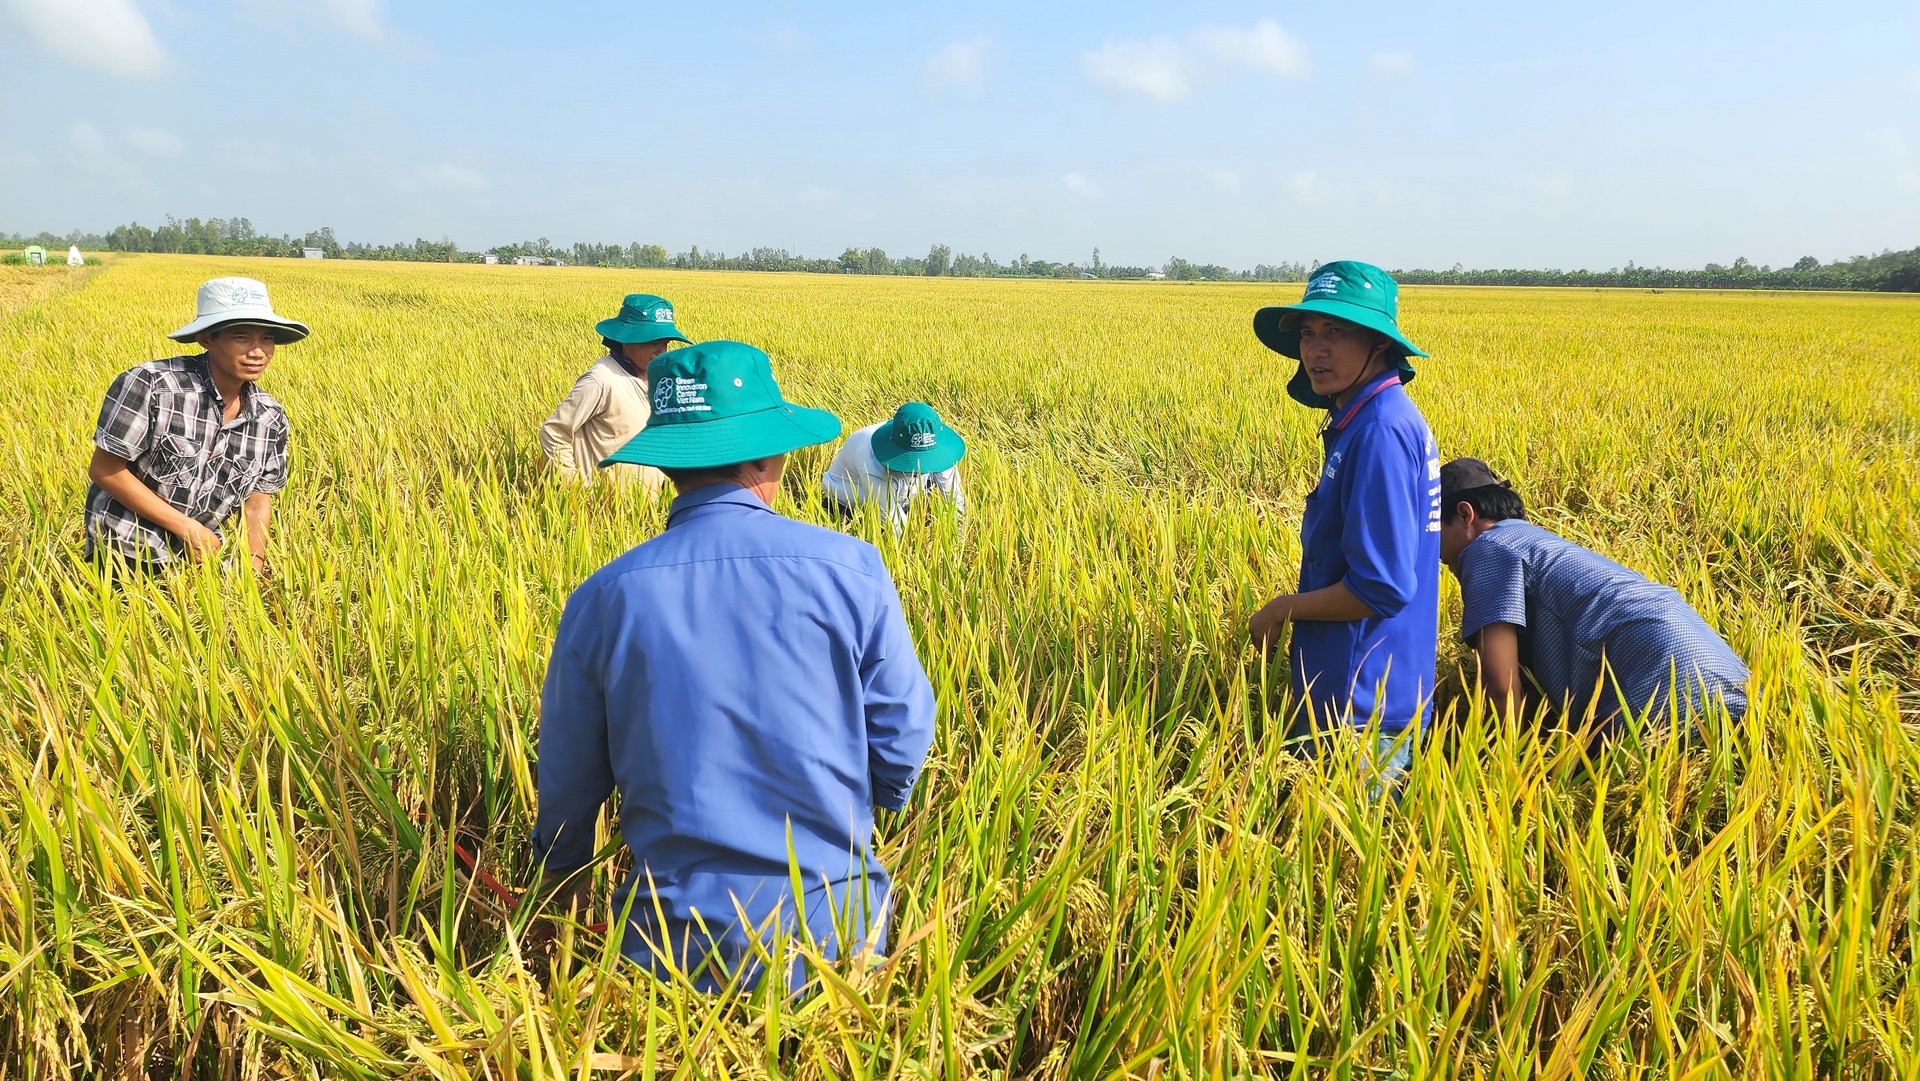 At least 1 million rice farmers in the Mekong Delta directly benefit from the Scheme of 1 million ha of high-quality rice. Photo: Kim Anh.